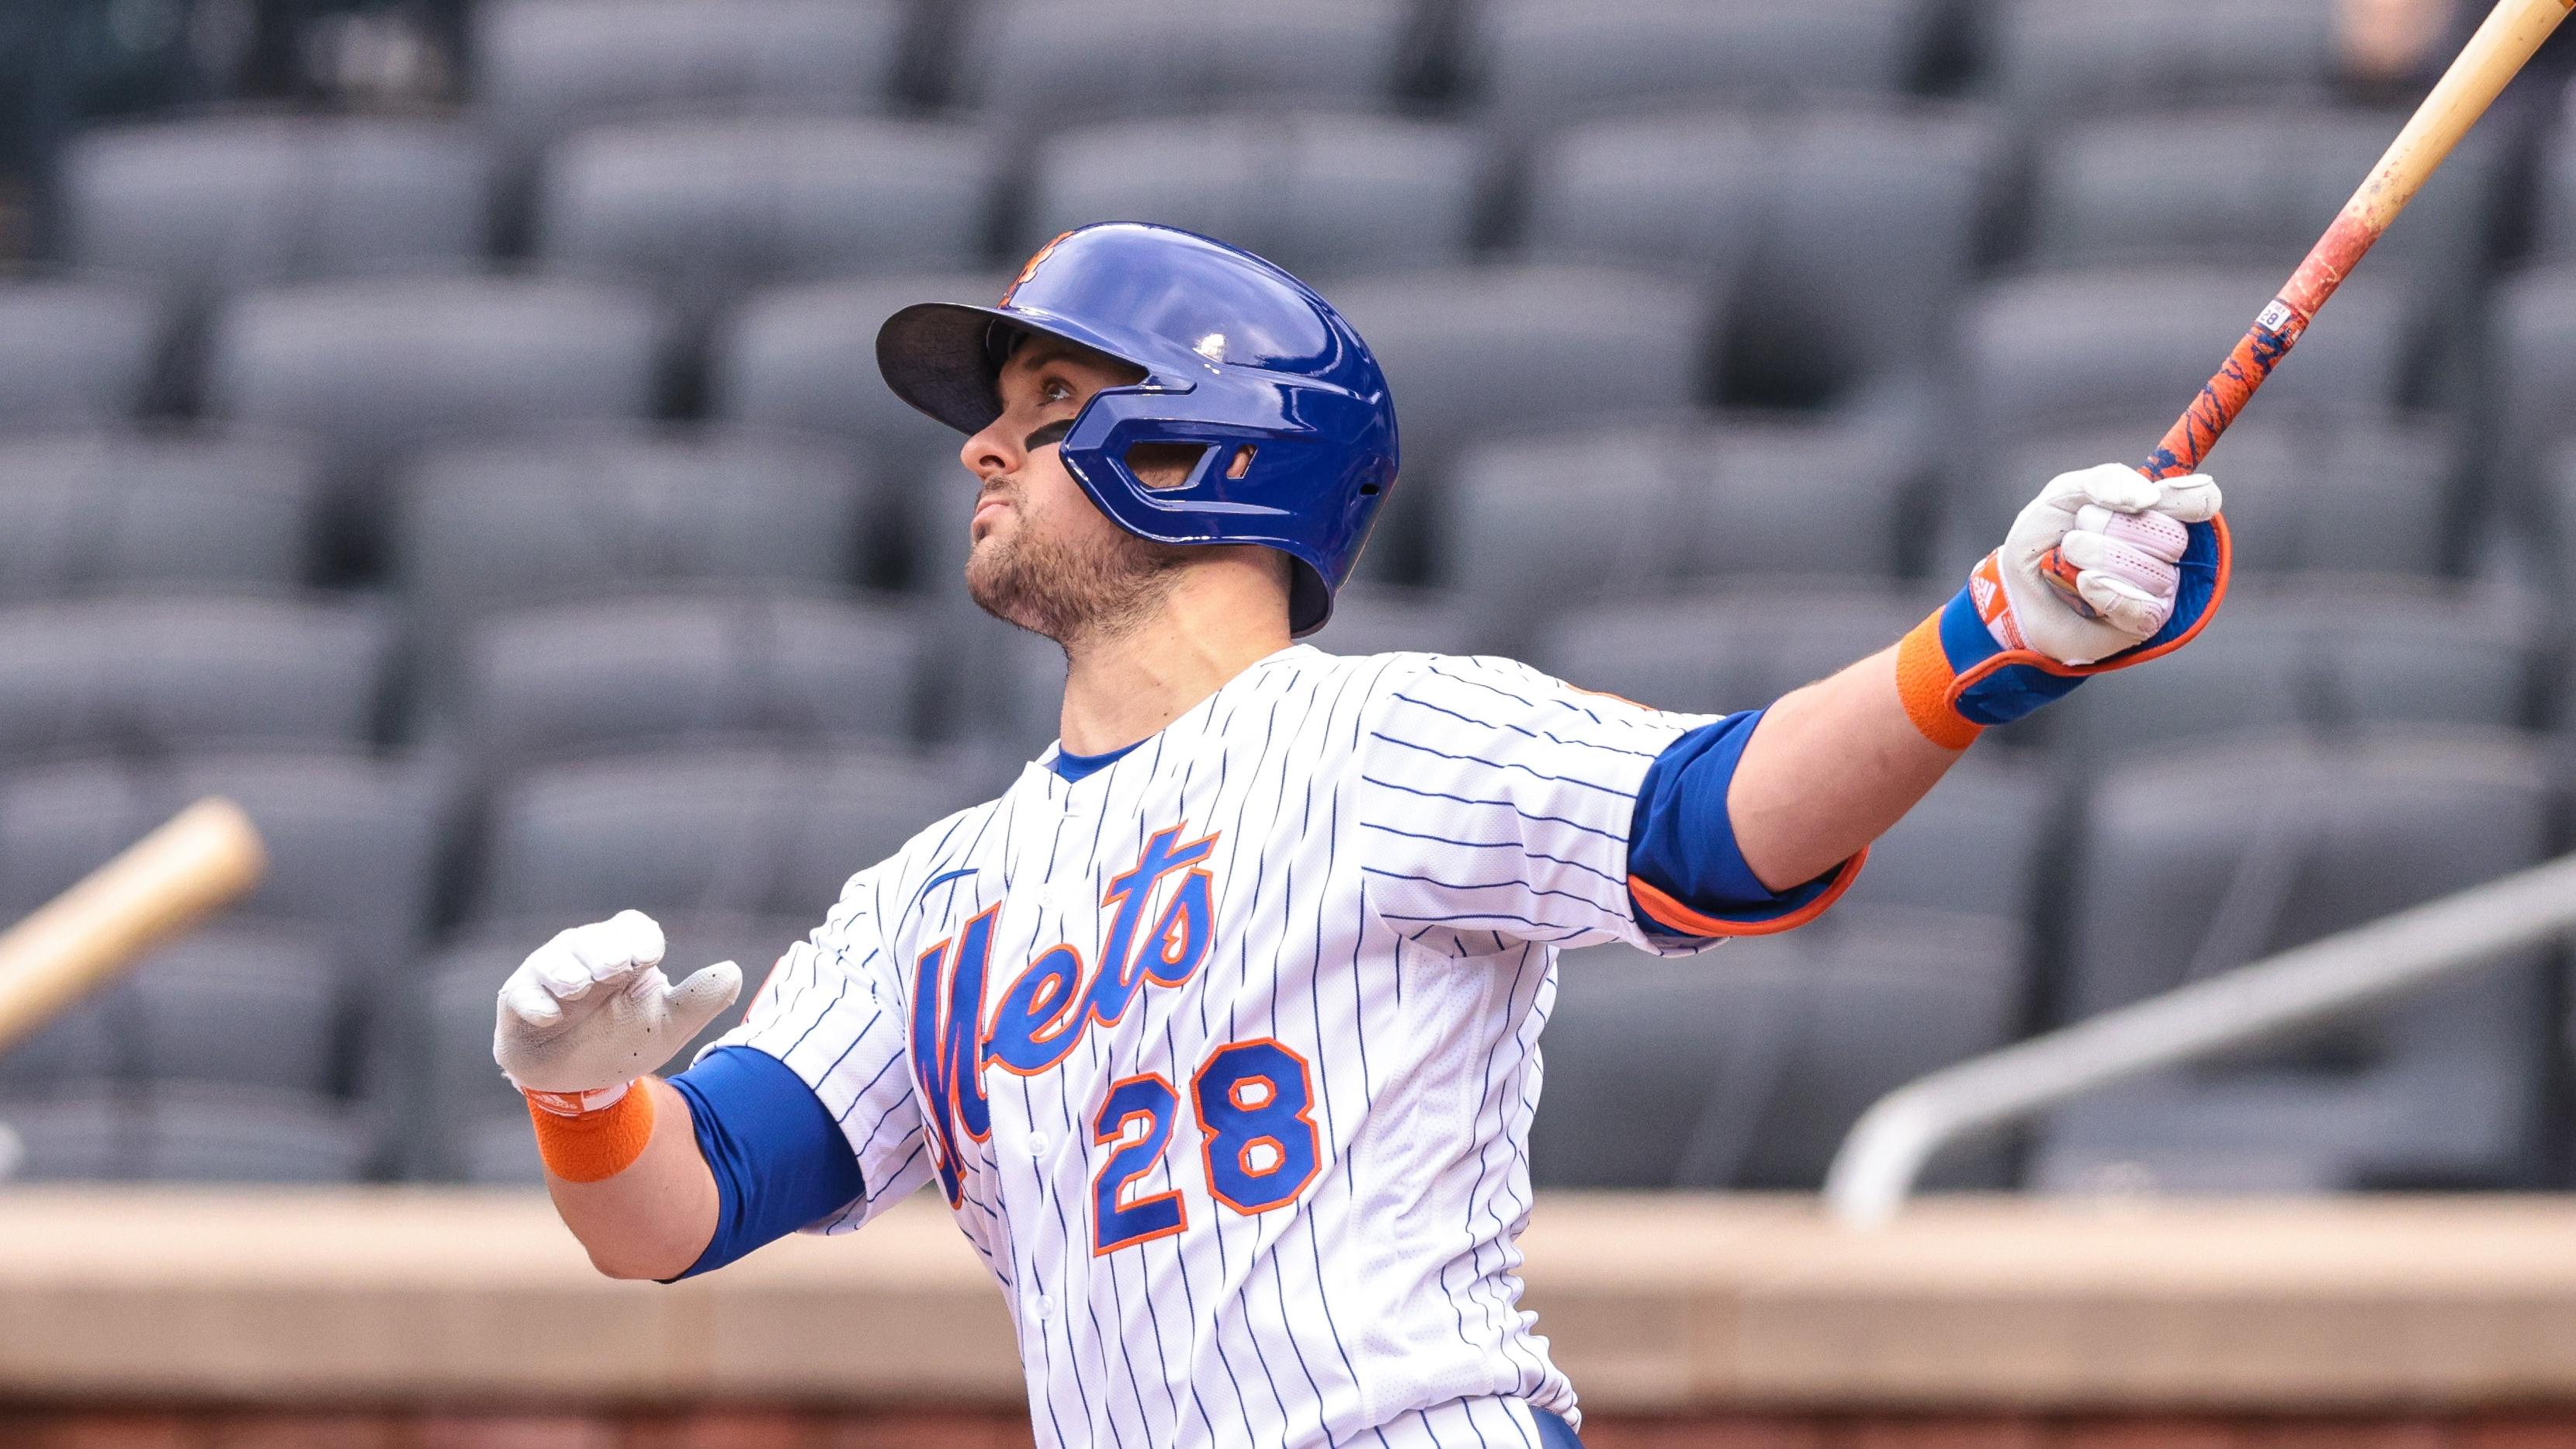 New York Mets left fielder J.D. Davis (28) hits a home run during the first inning against the Washington Nationals during the first inning at Citi Field. / Vincent Carchietta-USA TODAY Sports